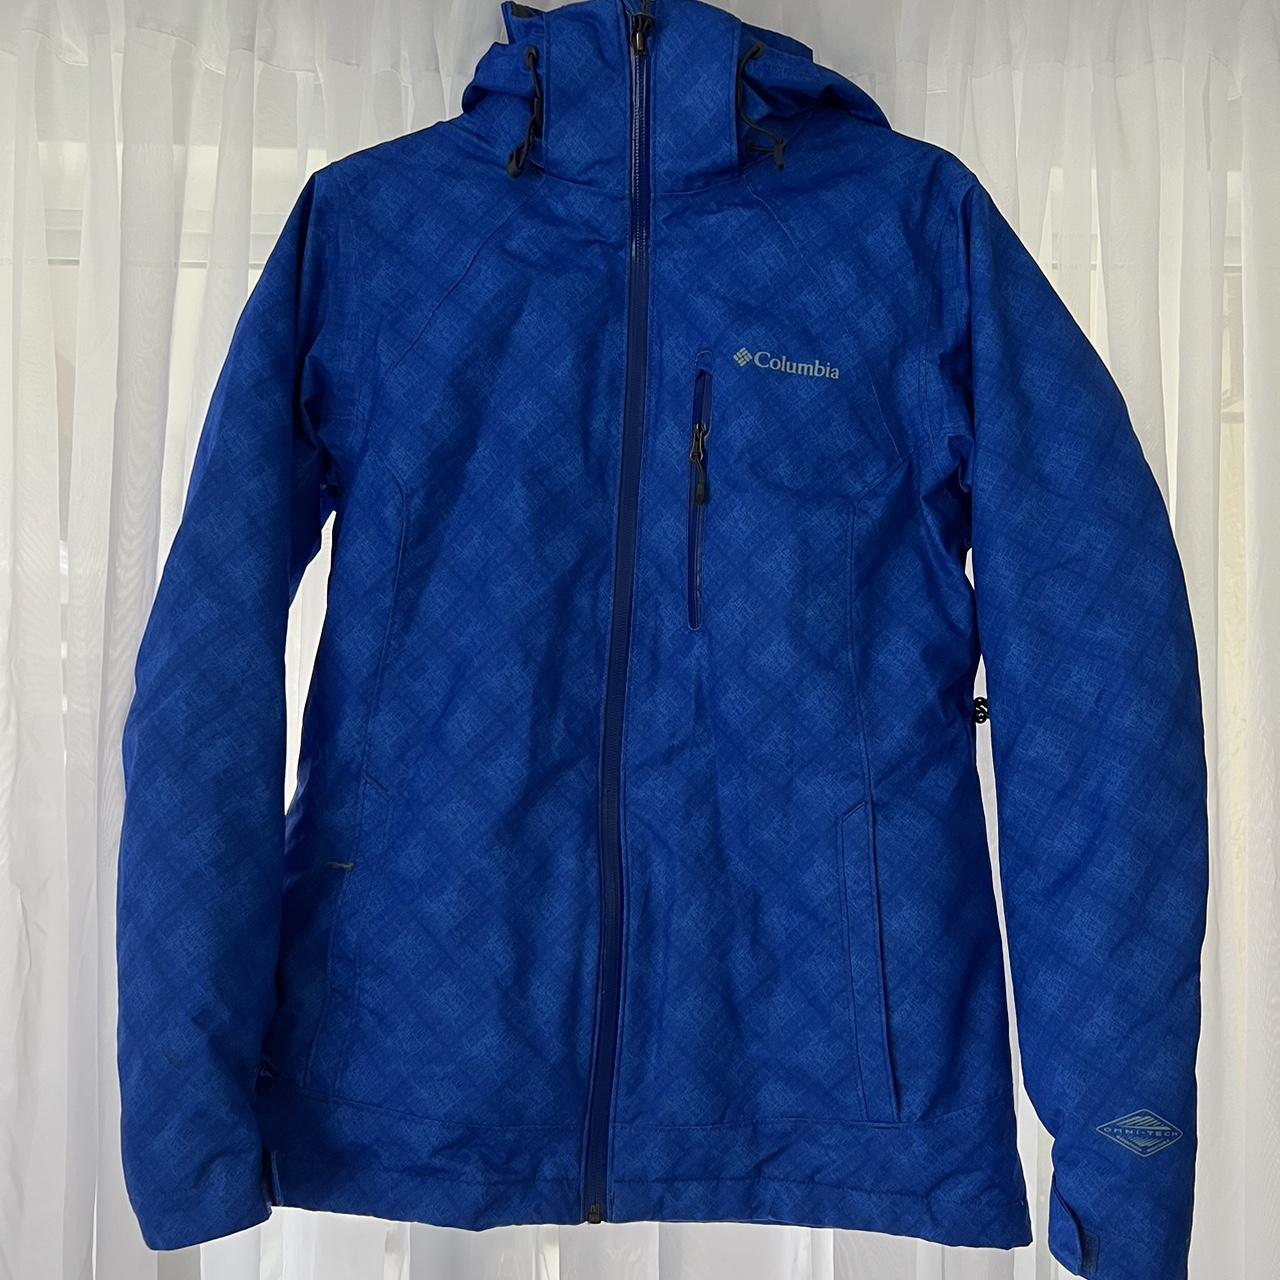 Women's Patagonia Cold Weather Insulated Jacket - Depop